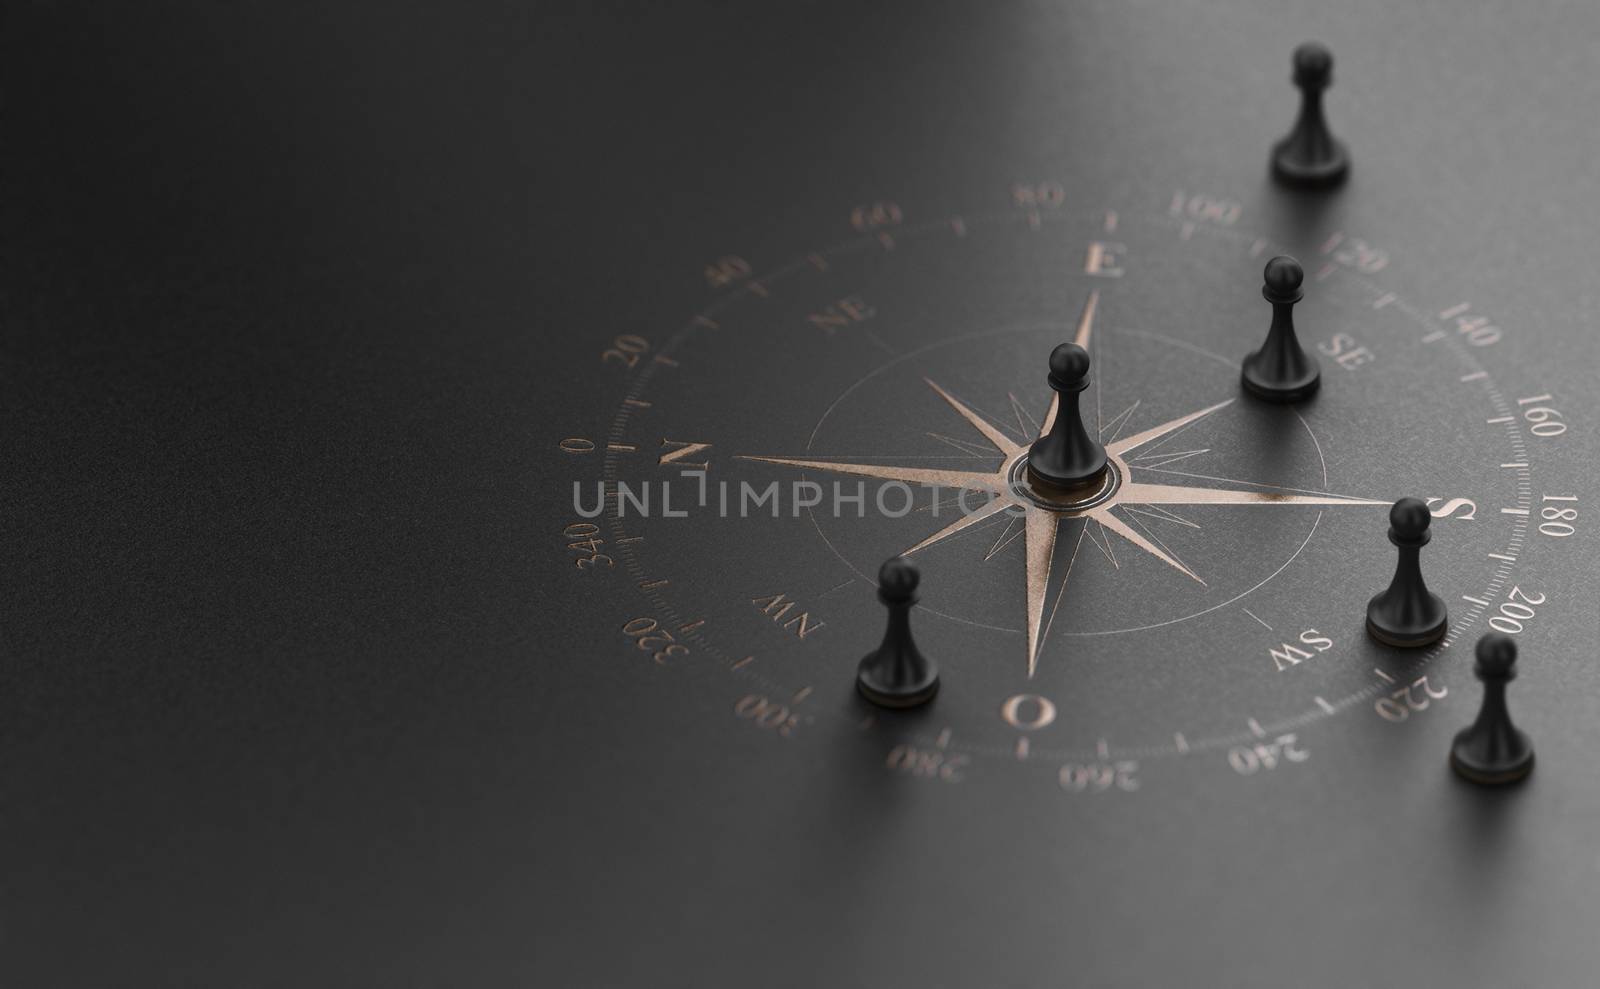 Golden compass rose over black background with five pawns. Business advice  or strategic marketing  concept. 3D illustration.